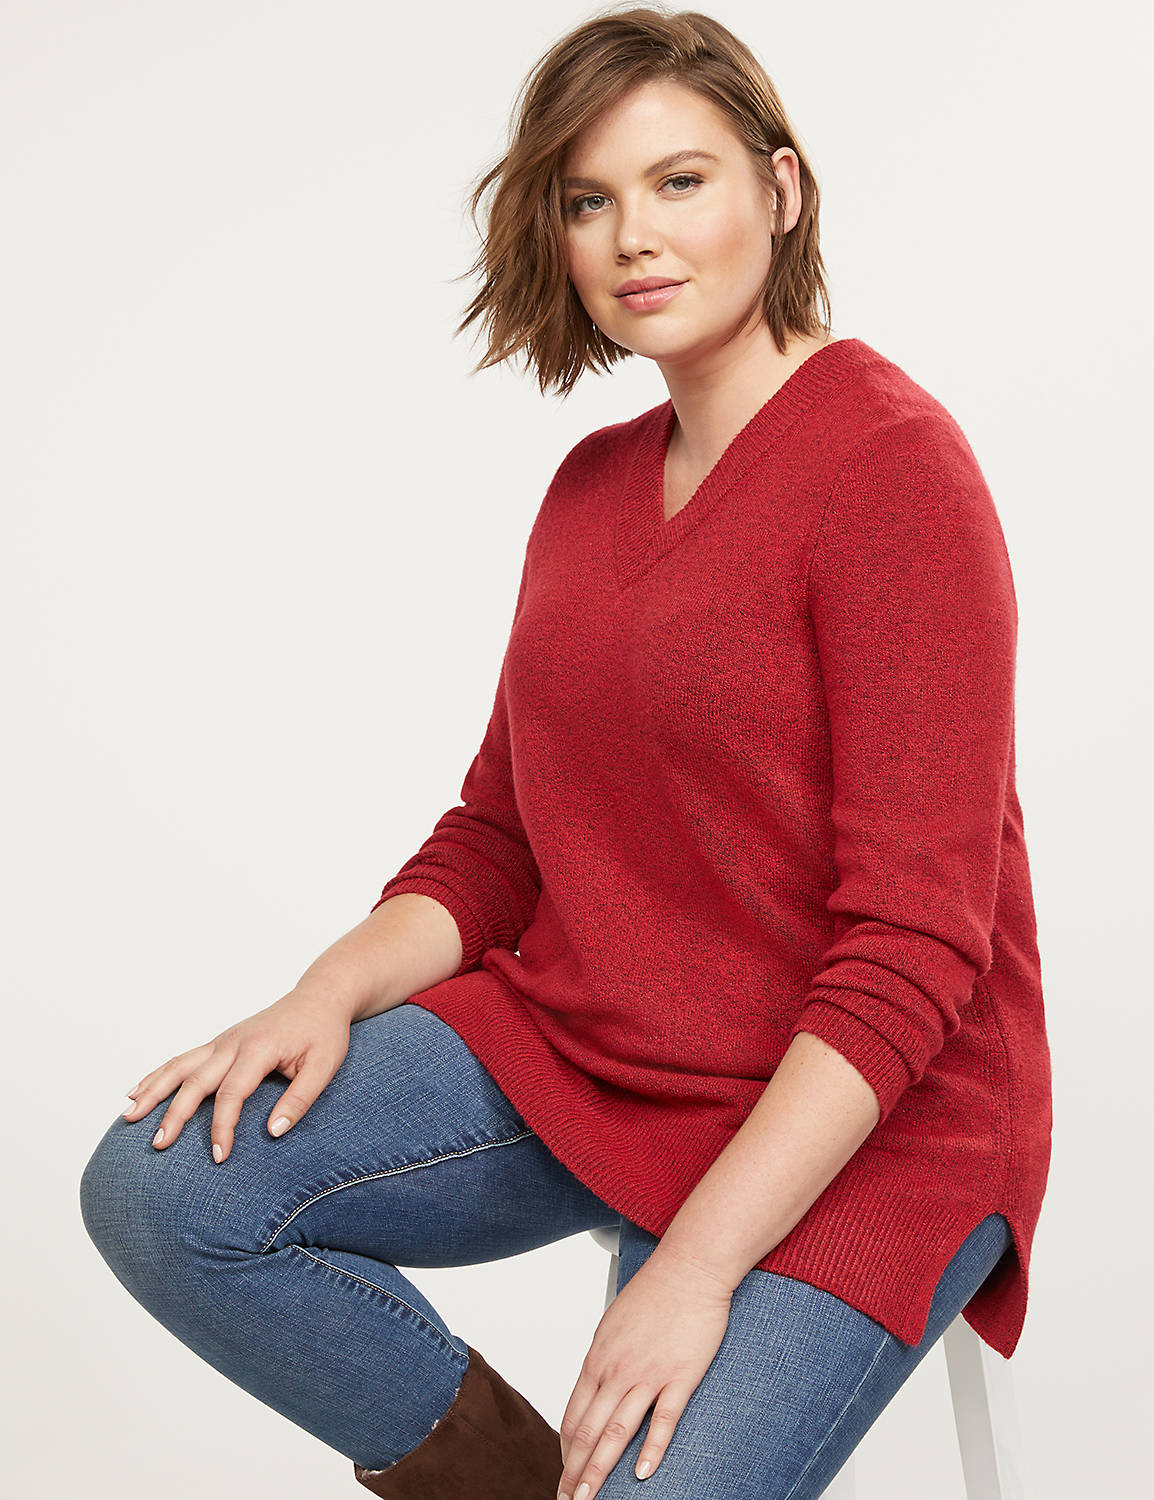 1108693 Pullover Vneck Sweater:Venetian Red CSI 0300944:22/24 Product Image 1